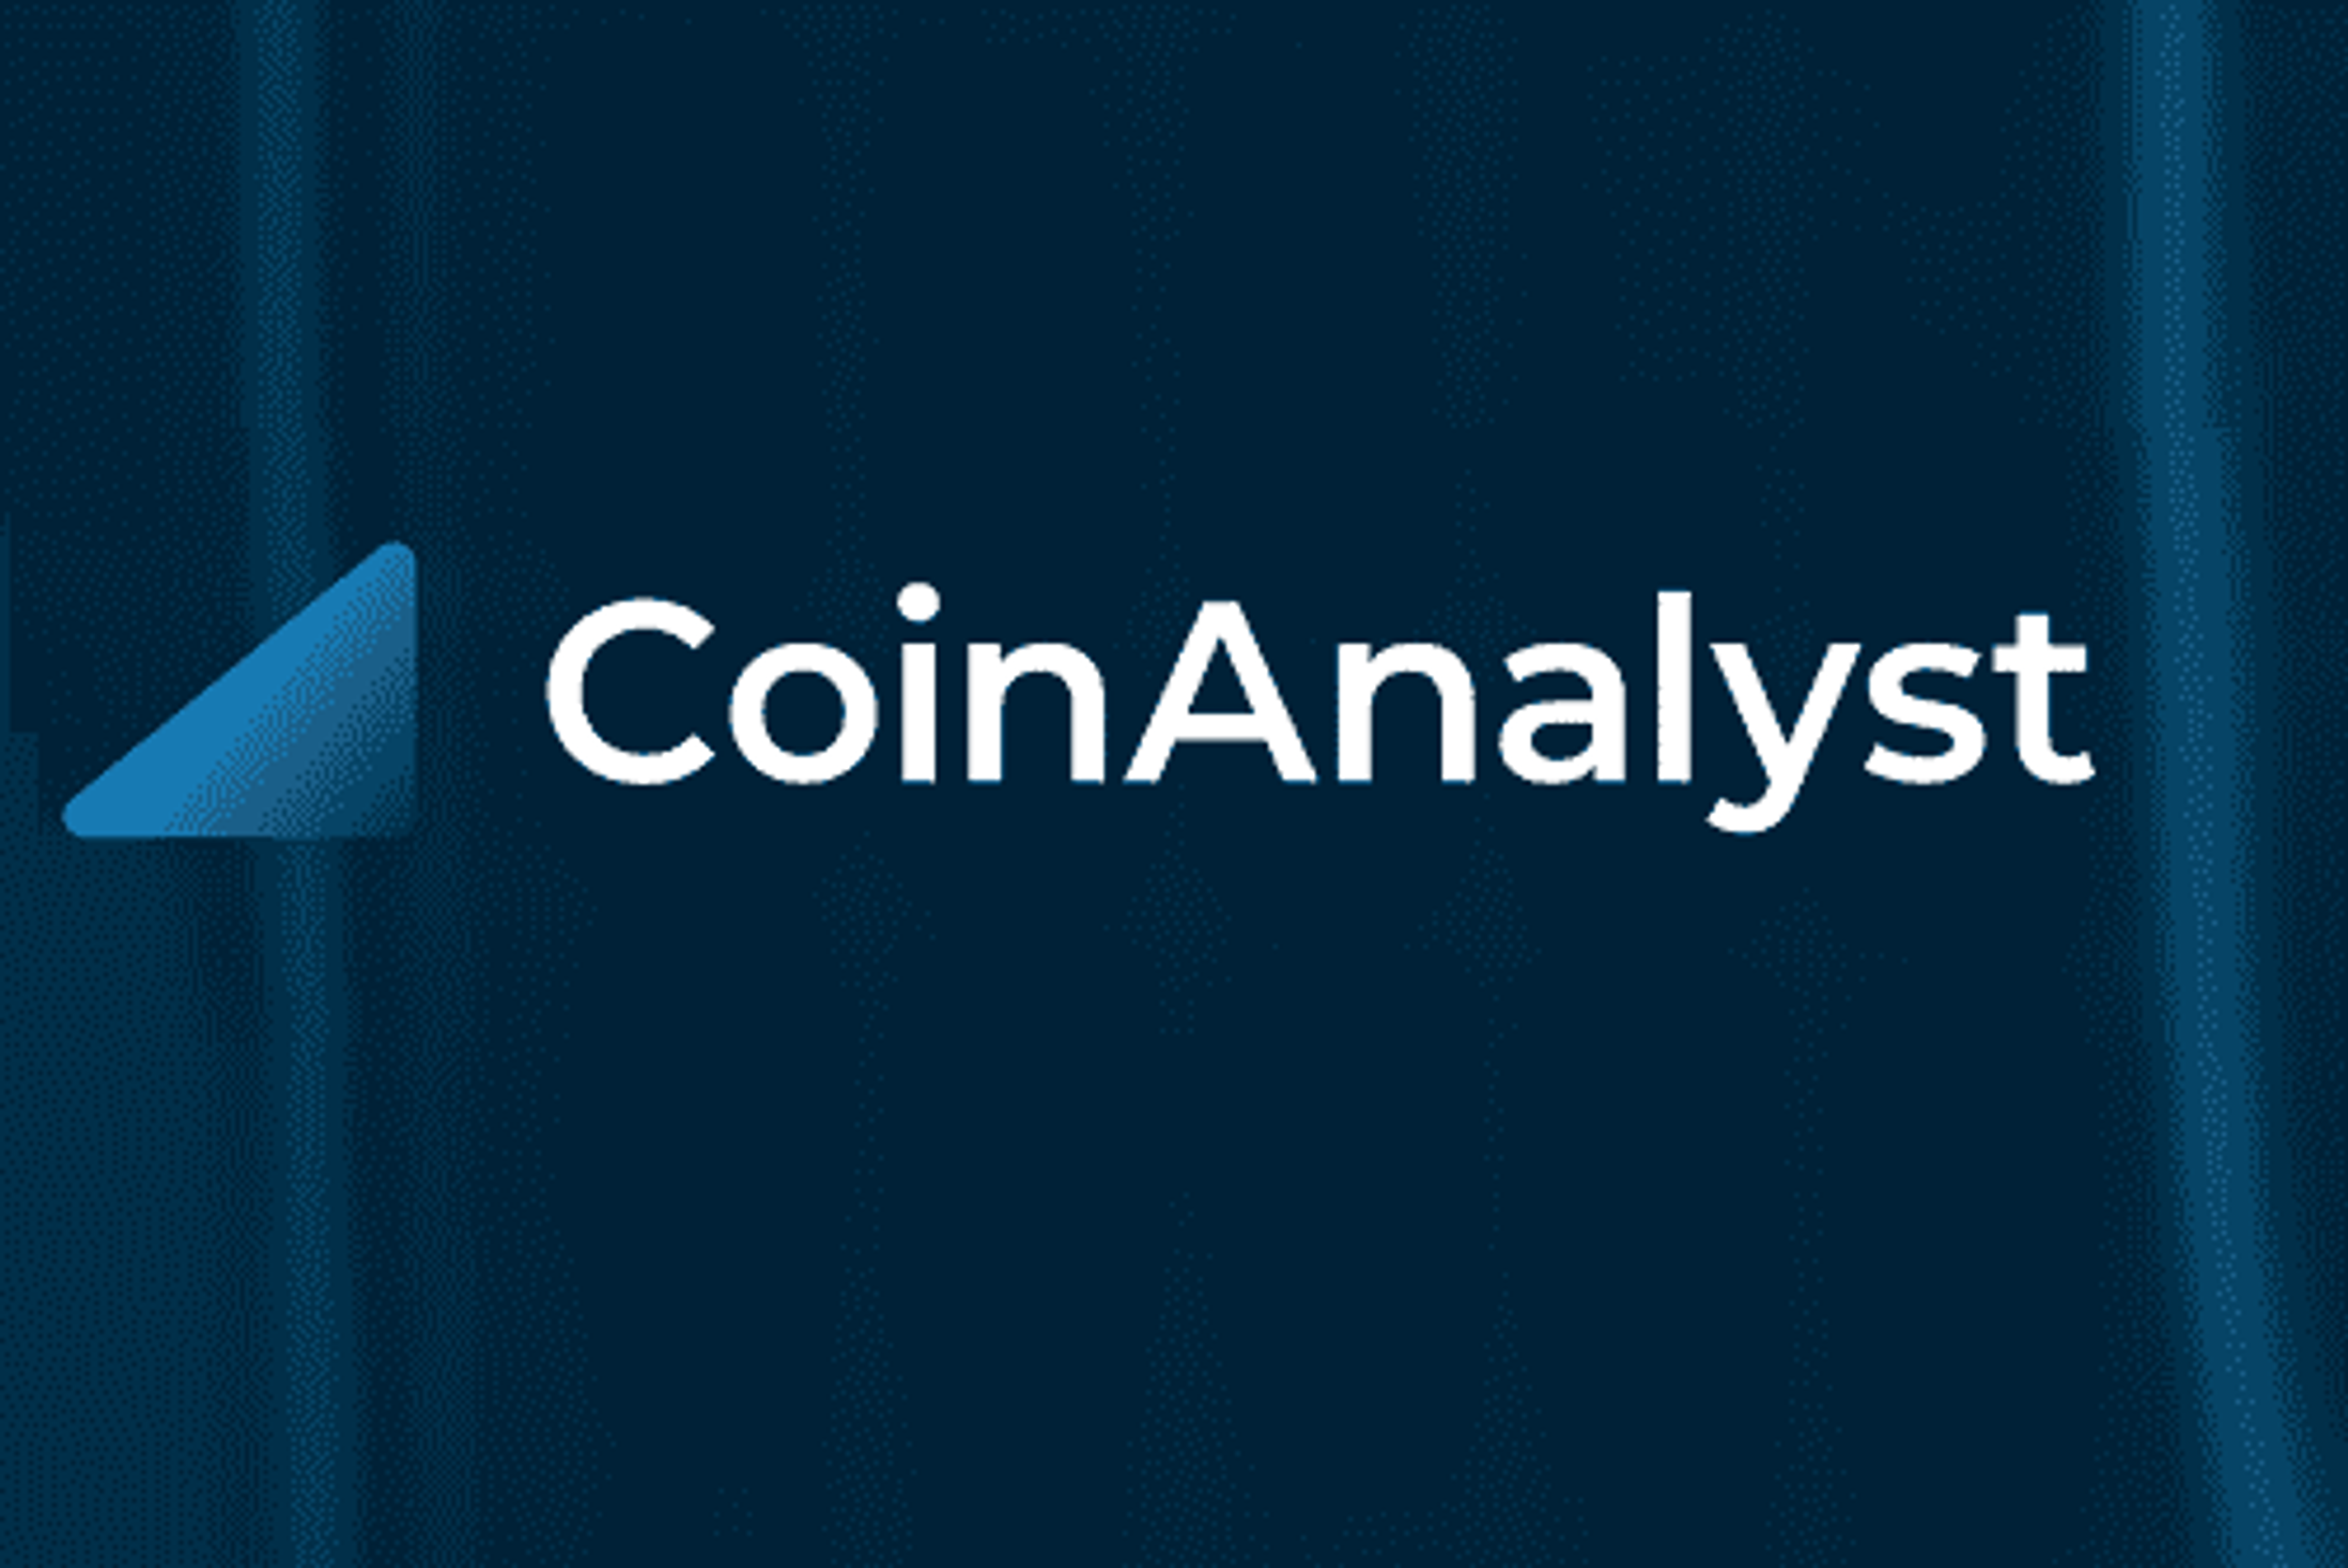 CoinAnalyst Corp. Announces Receipt of Management Cease Trade Order